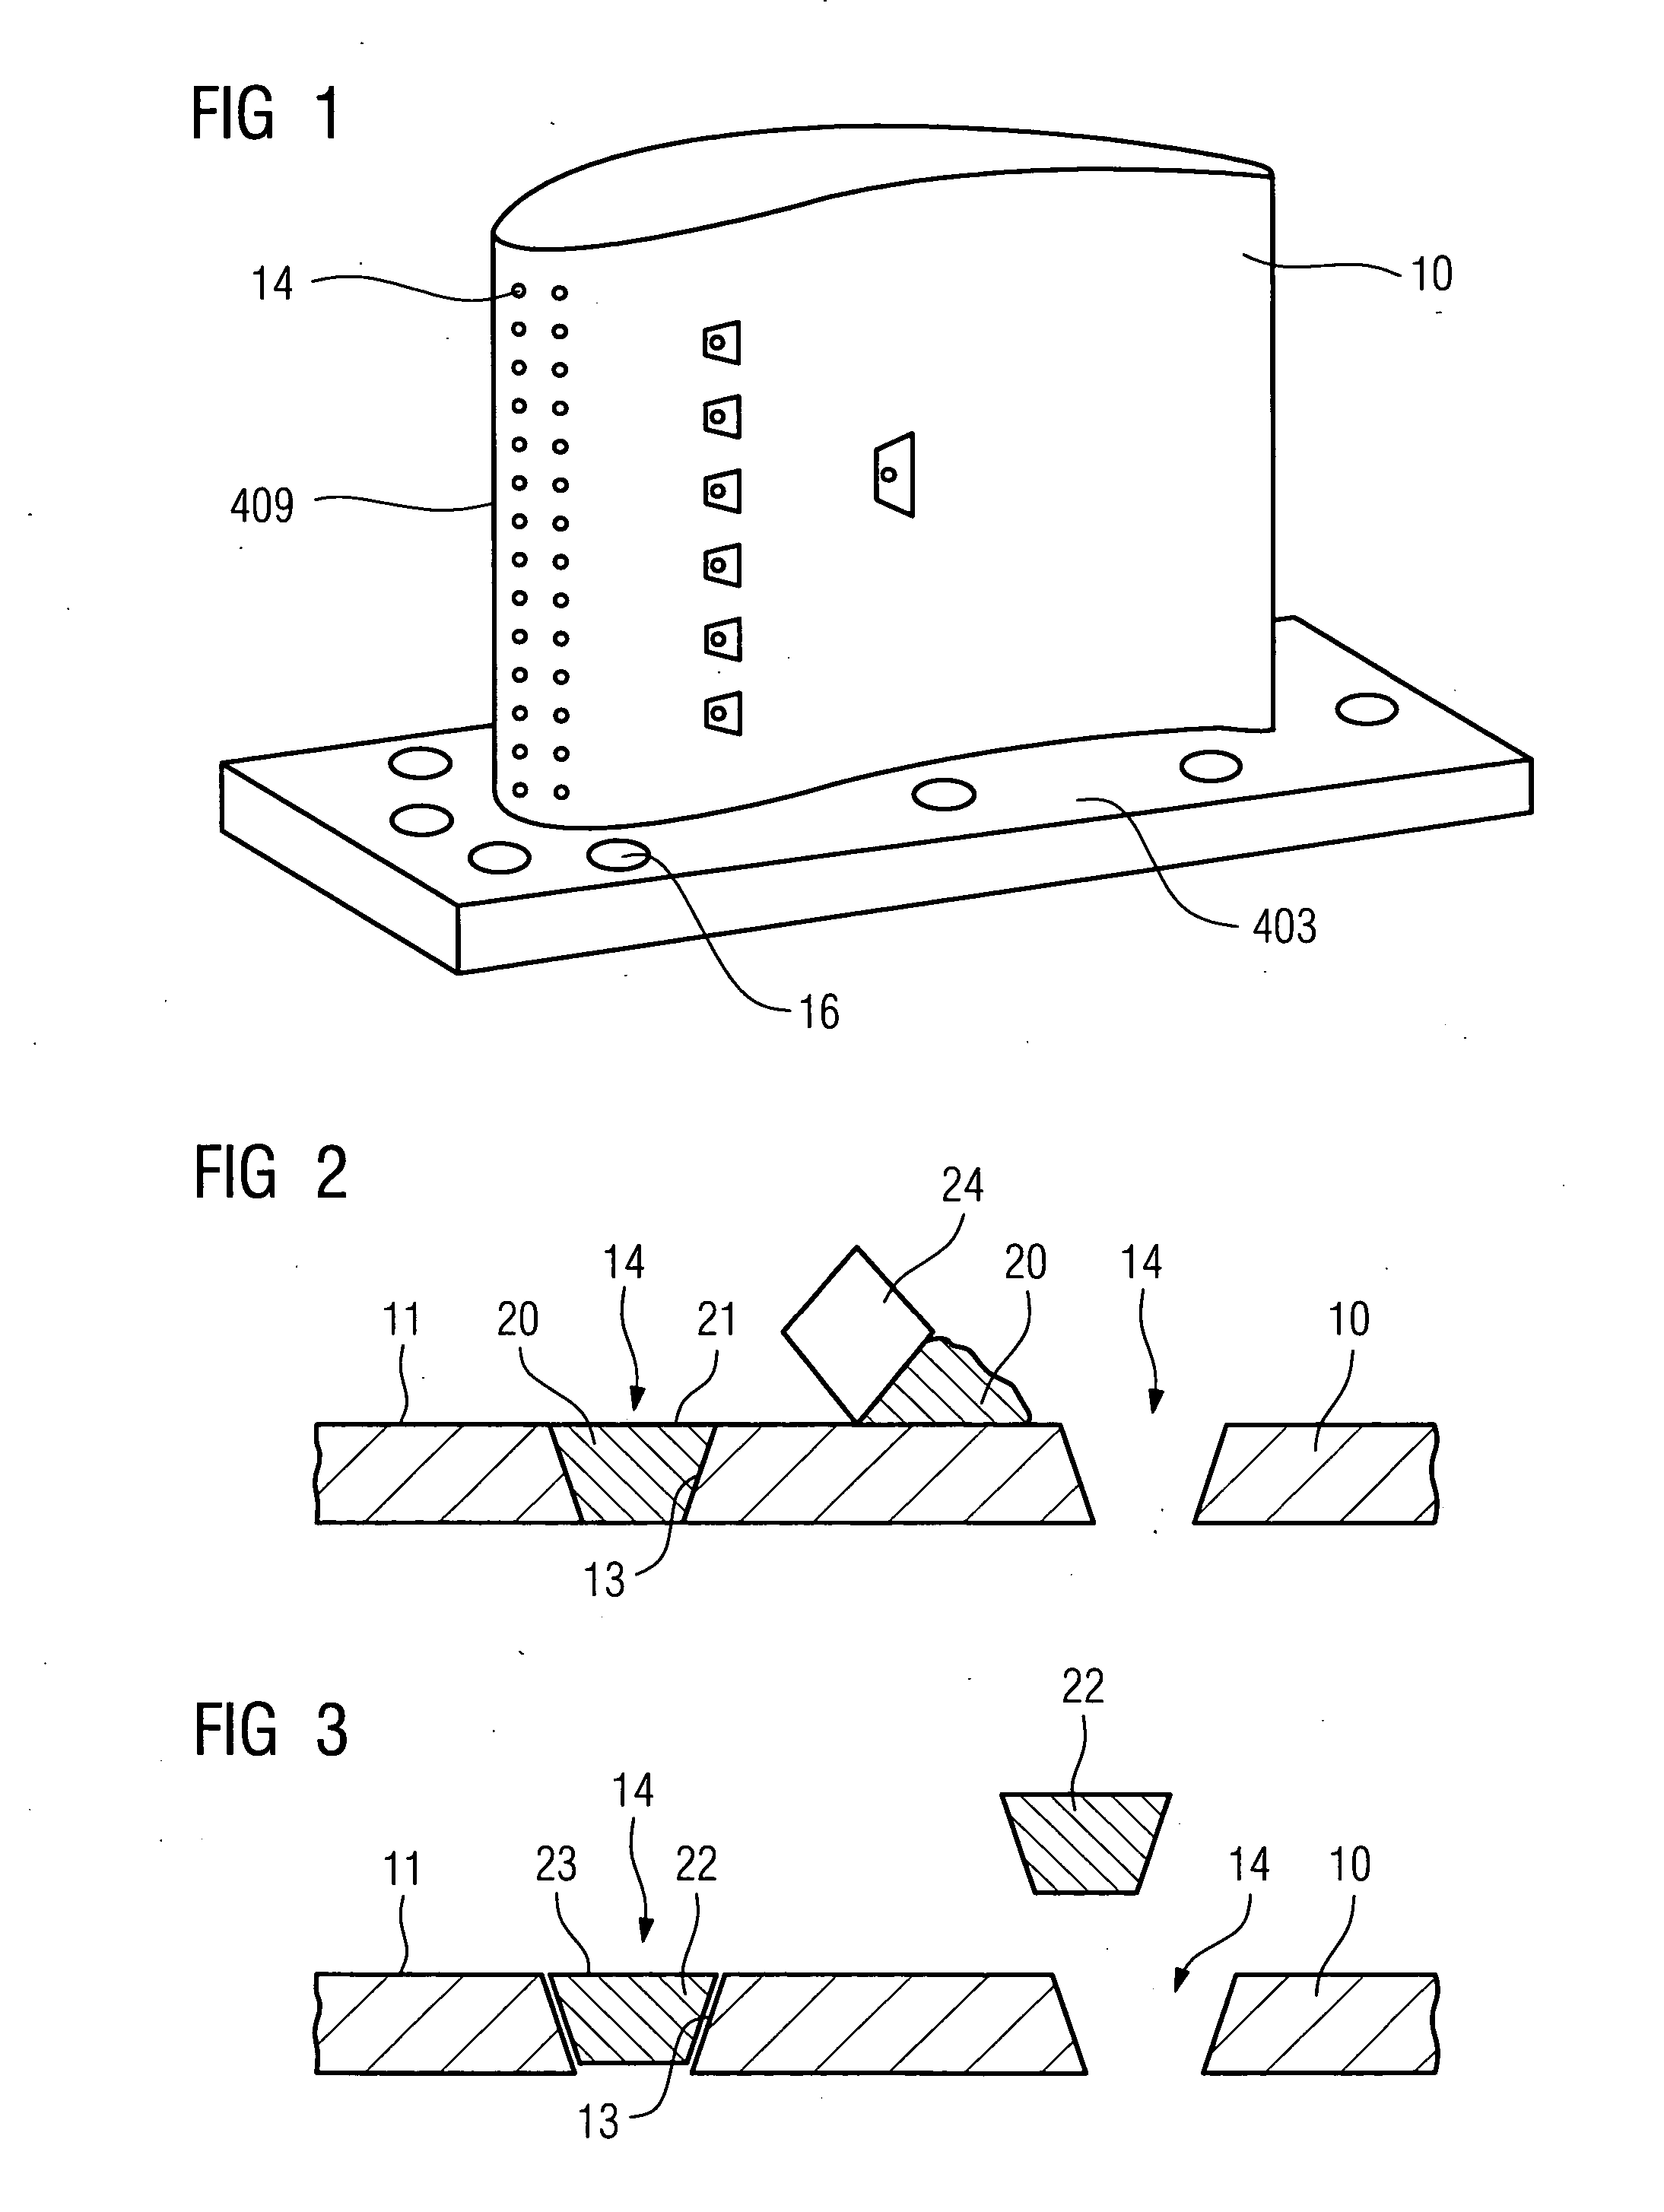 Process for protecting openings in a component during a treatment process, preventing penetration of material, and a ceramic material